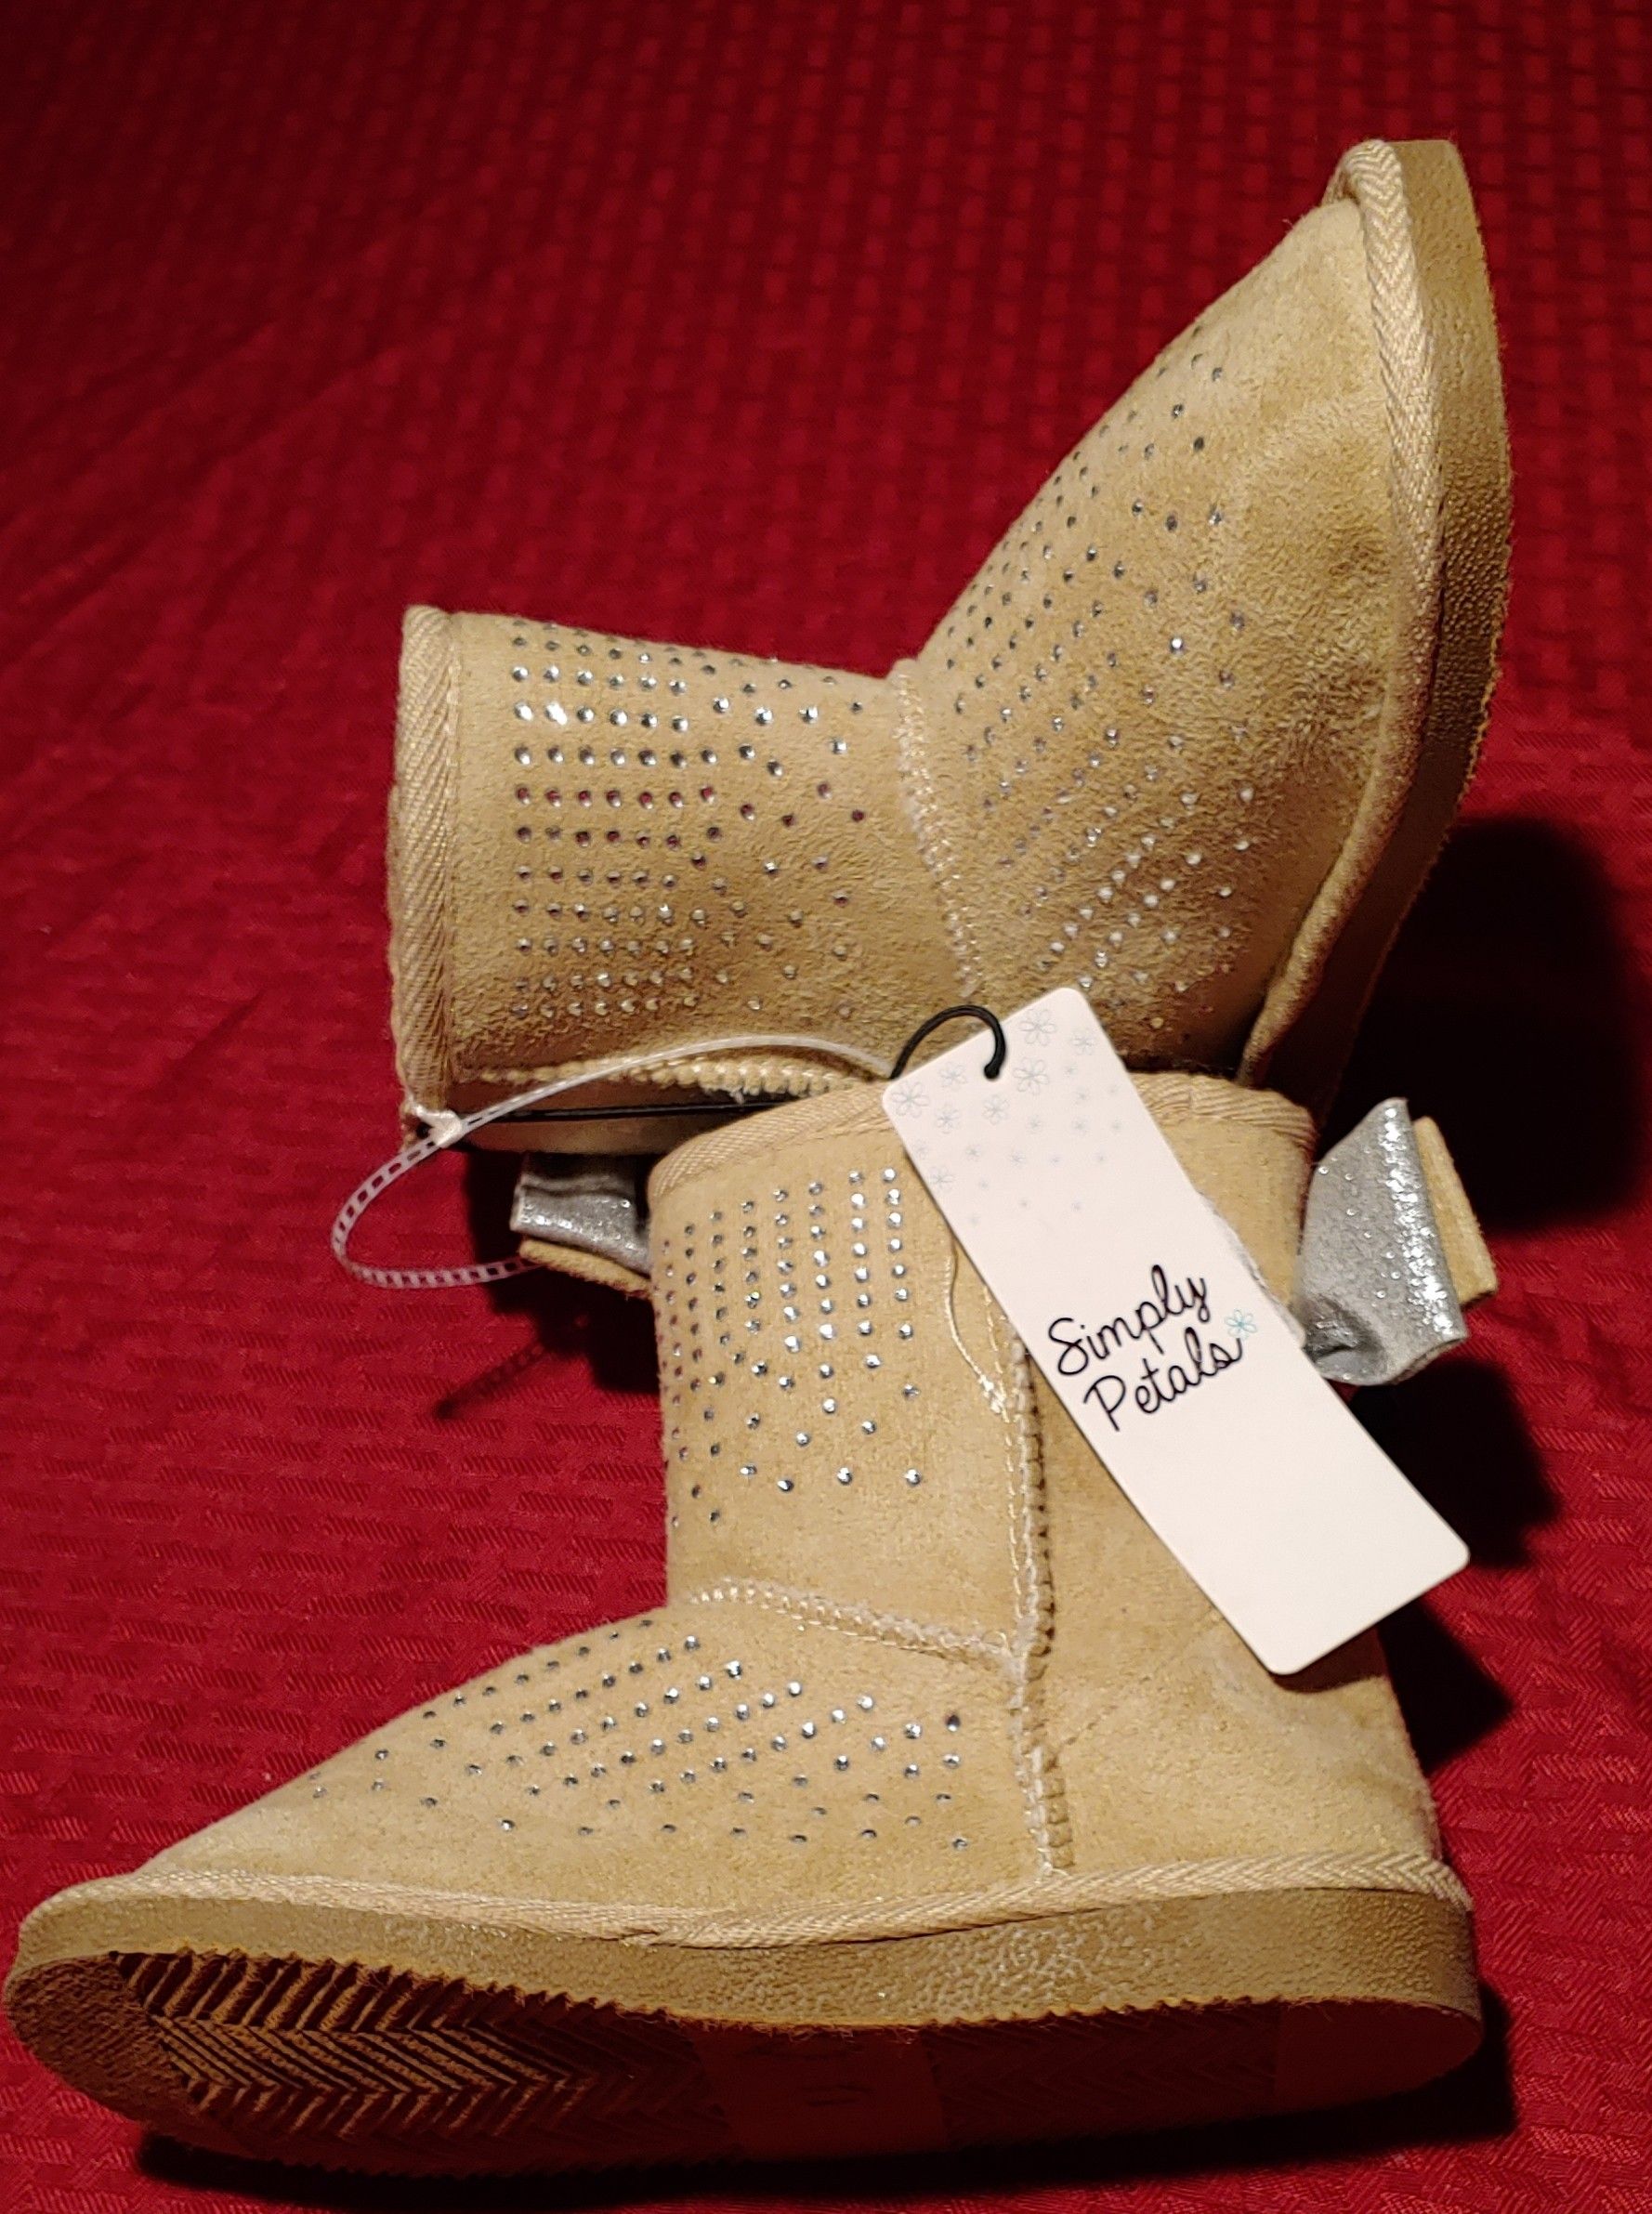 Girls beige sparkle snow boots size 1 brand new w tags $10 .00 obo